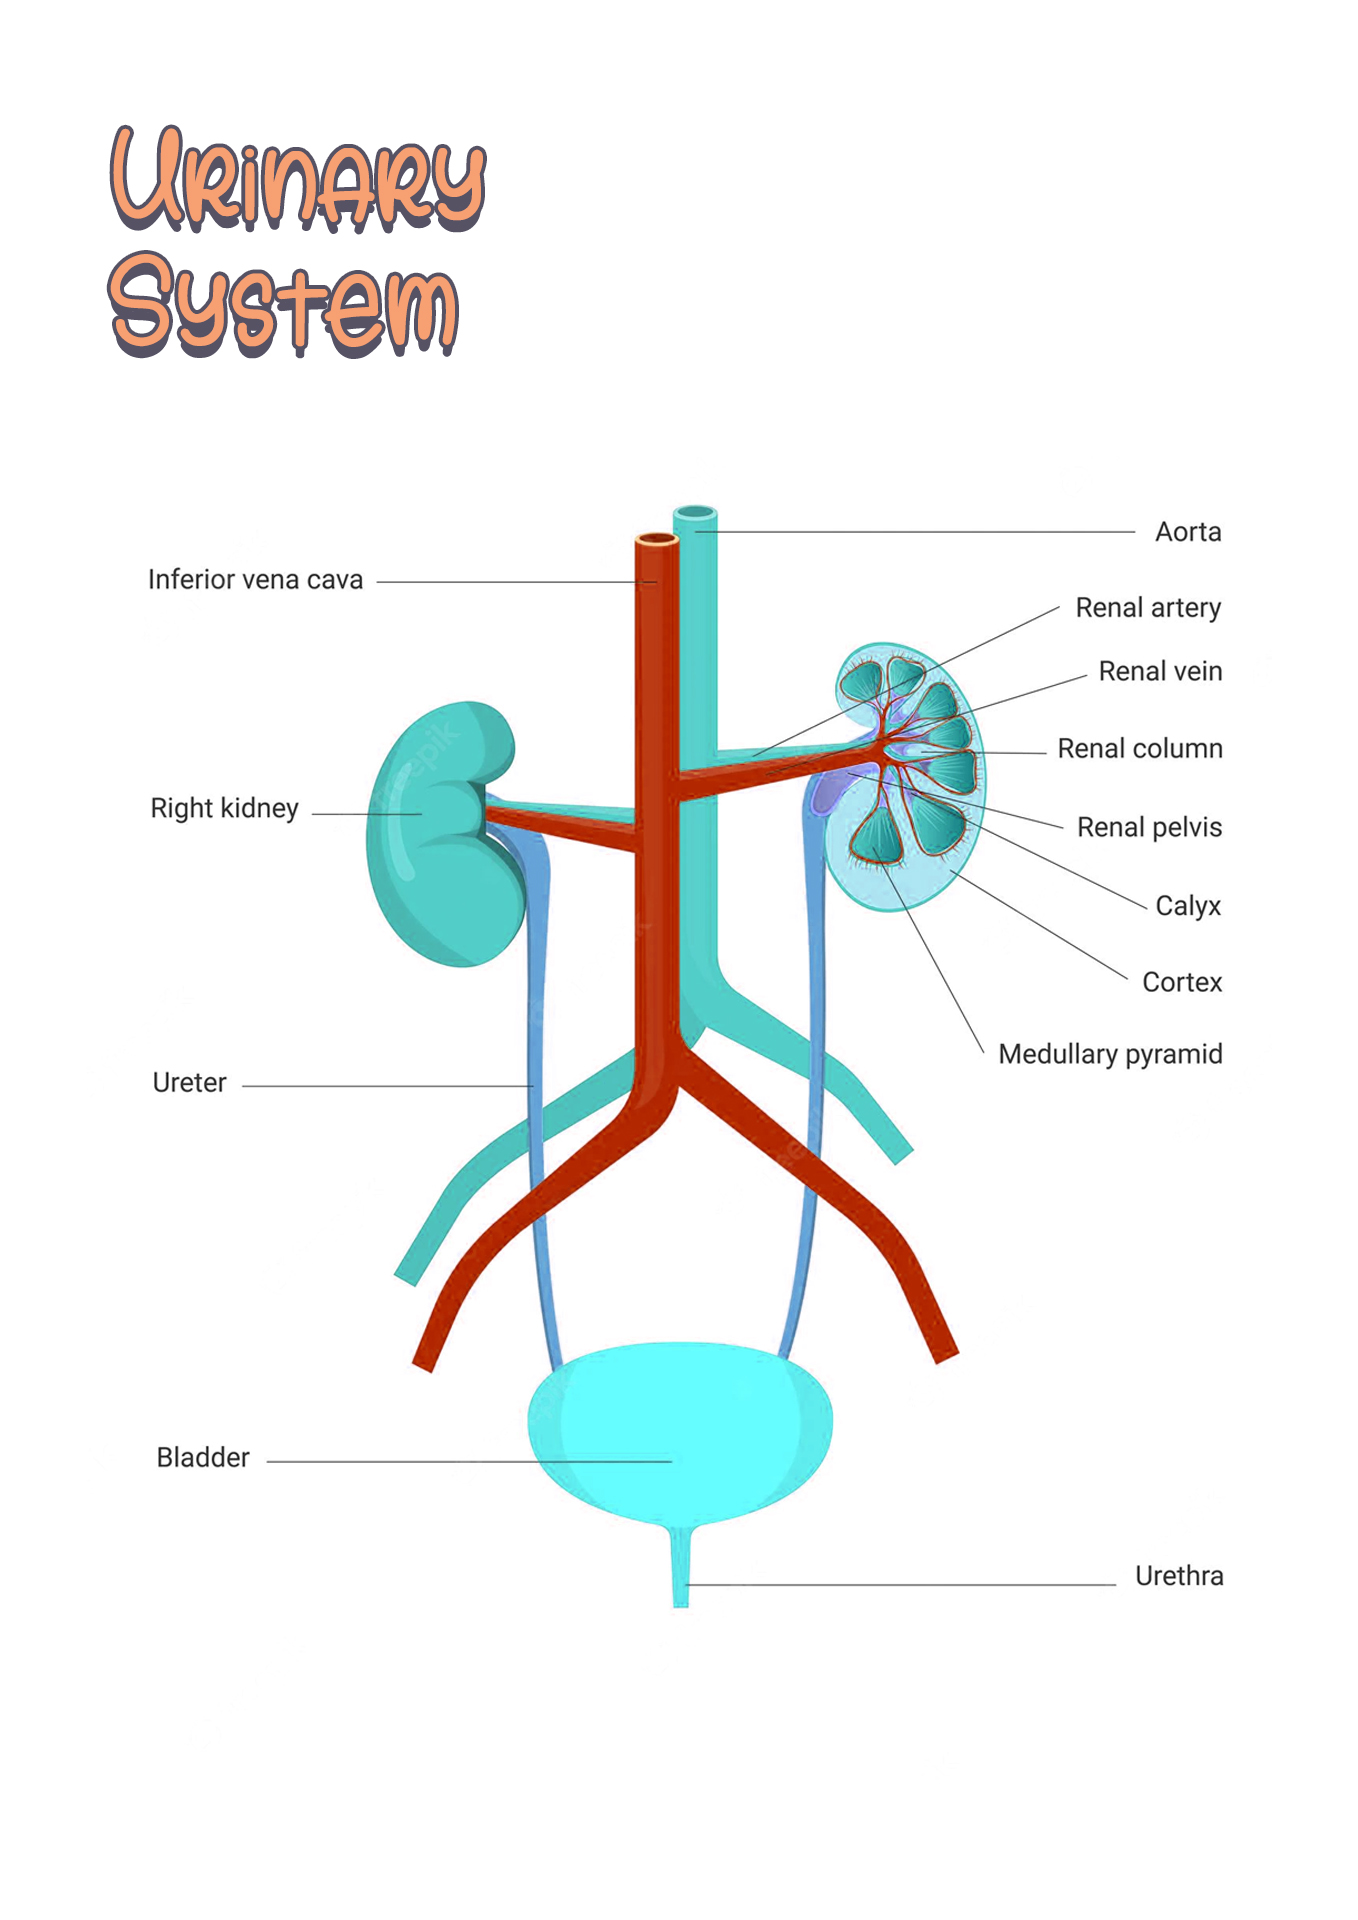 Urinary System Anatomy and Physiology Image